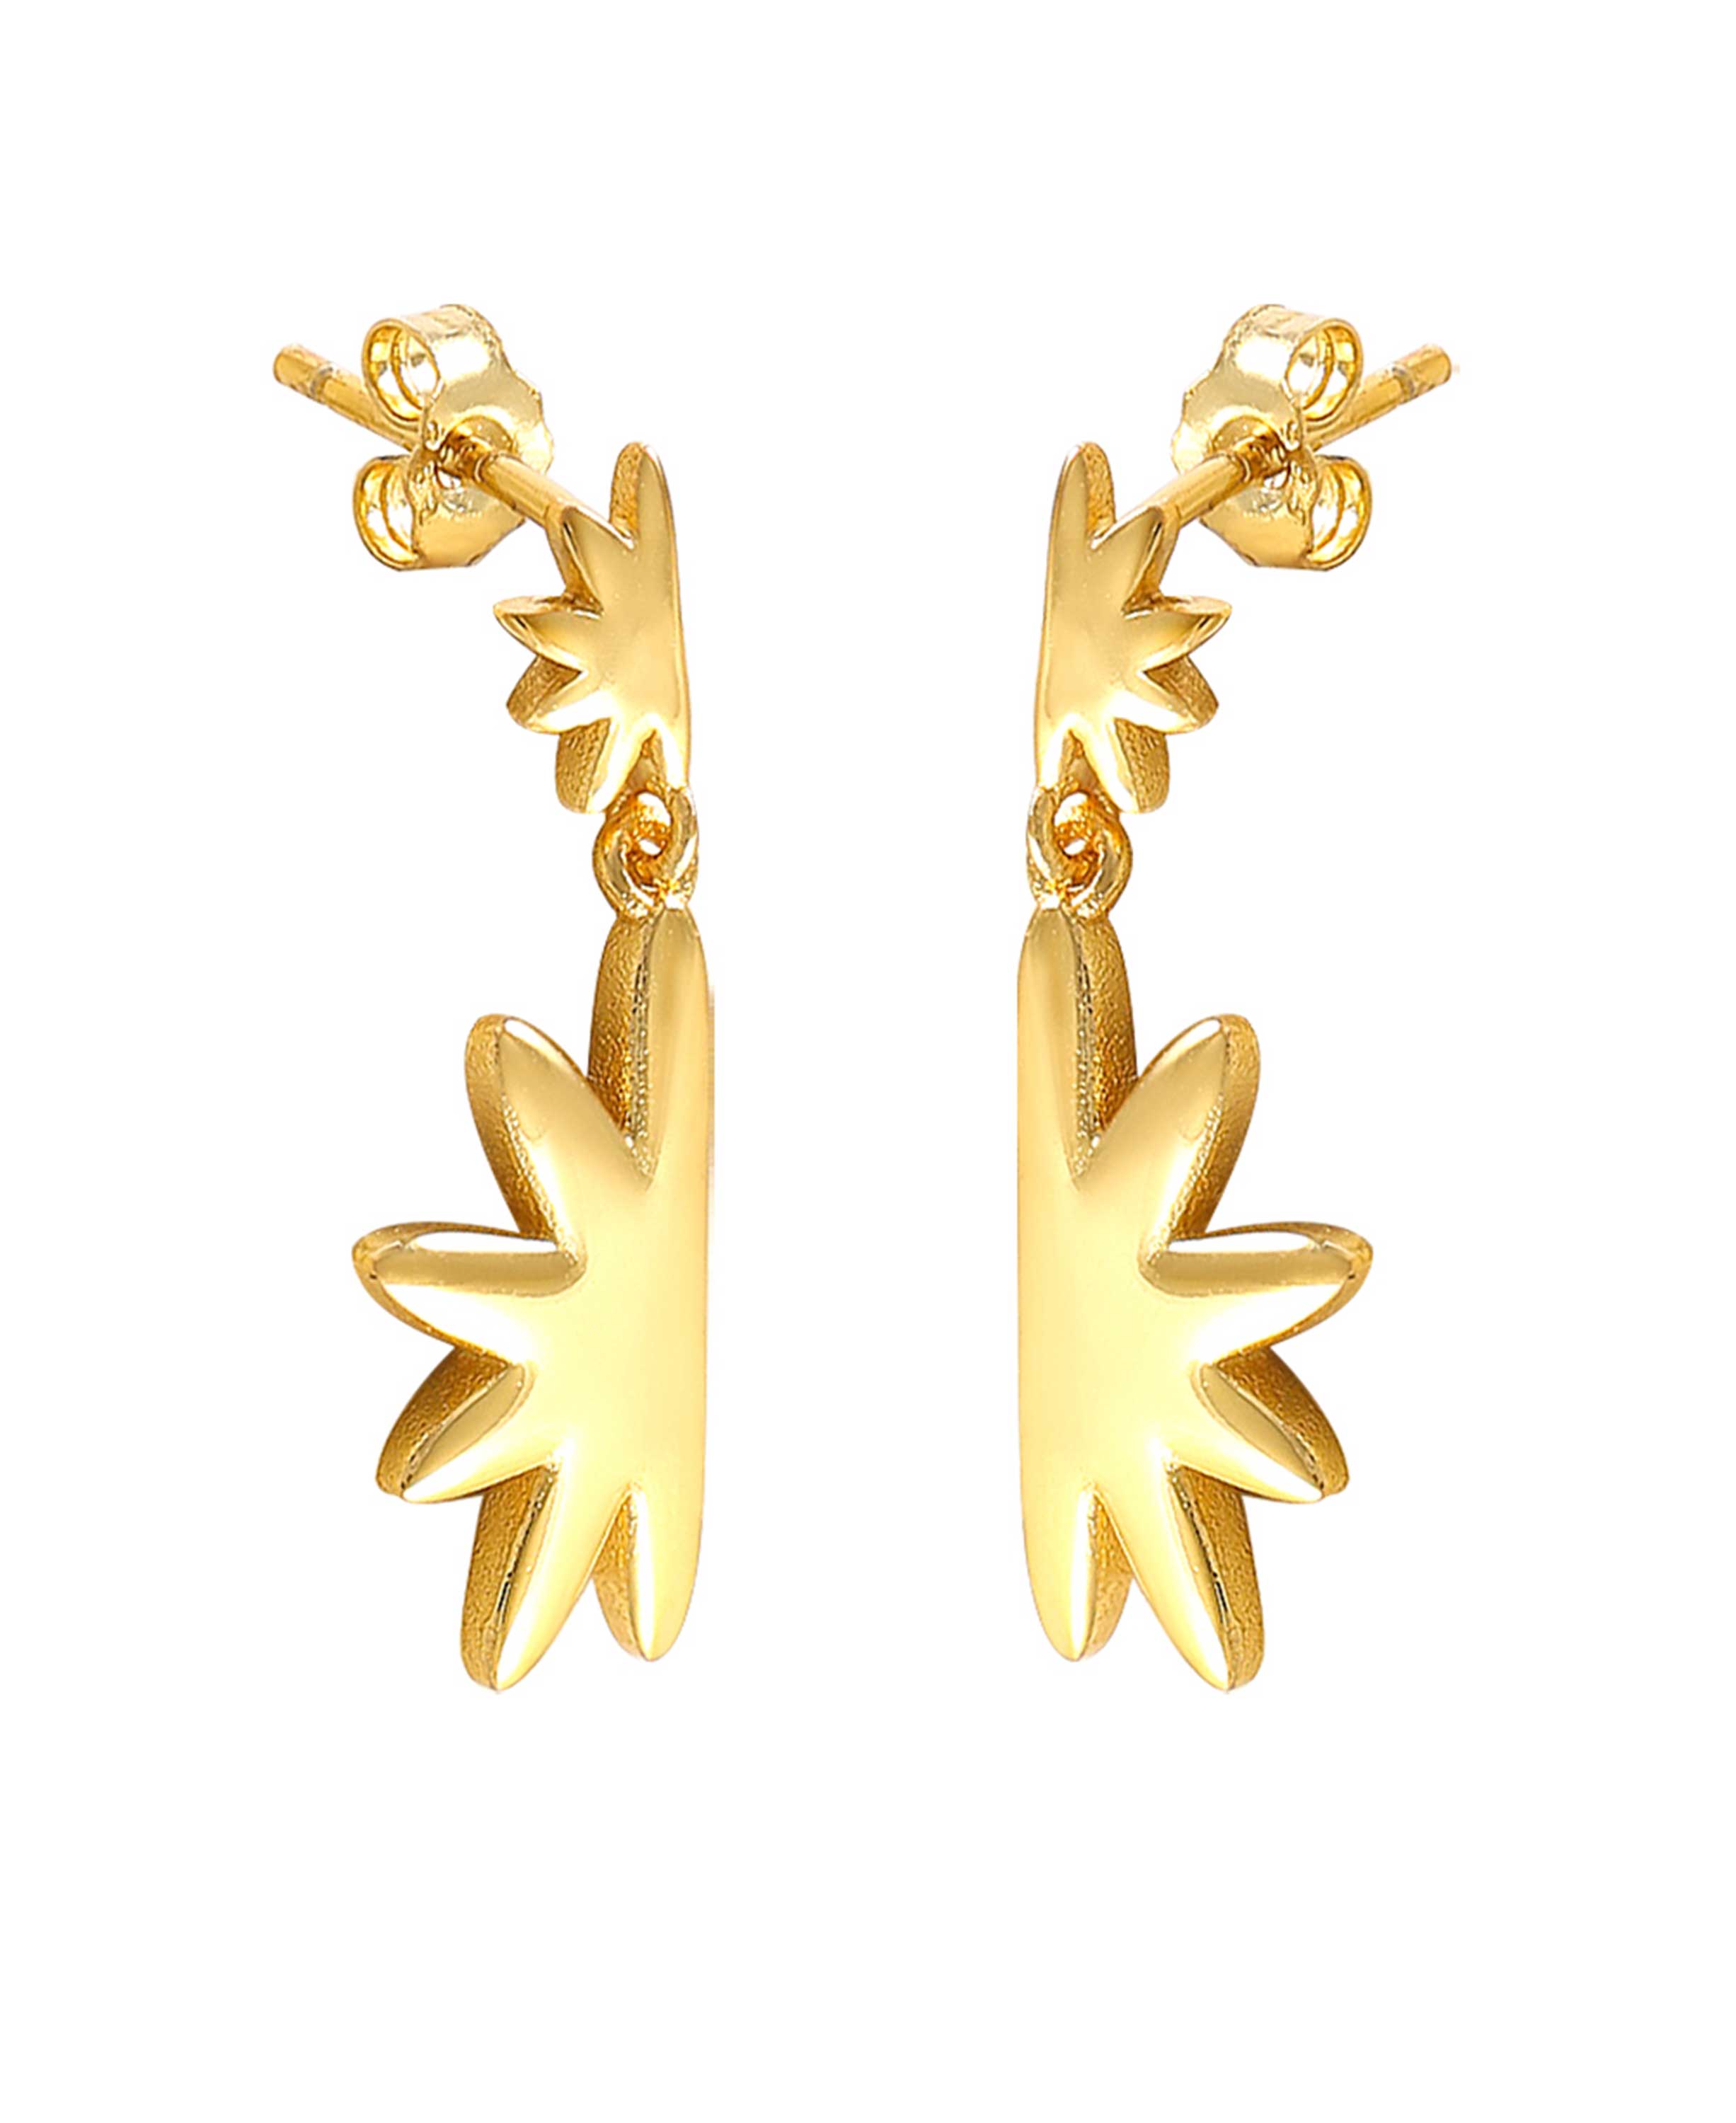 Earrings plated with 18 karat gold or pure sterling silver